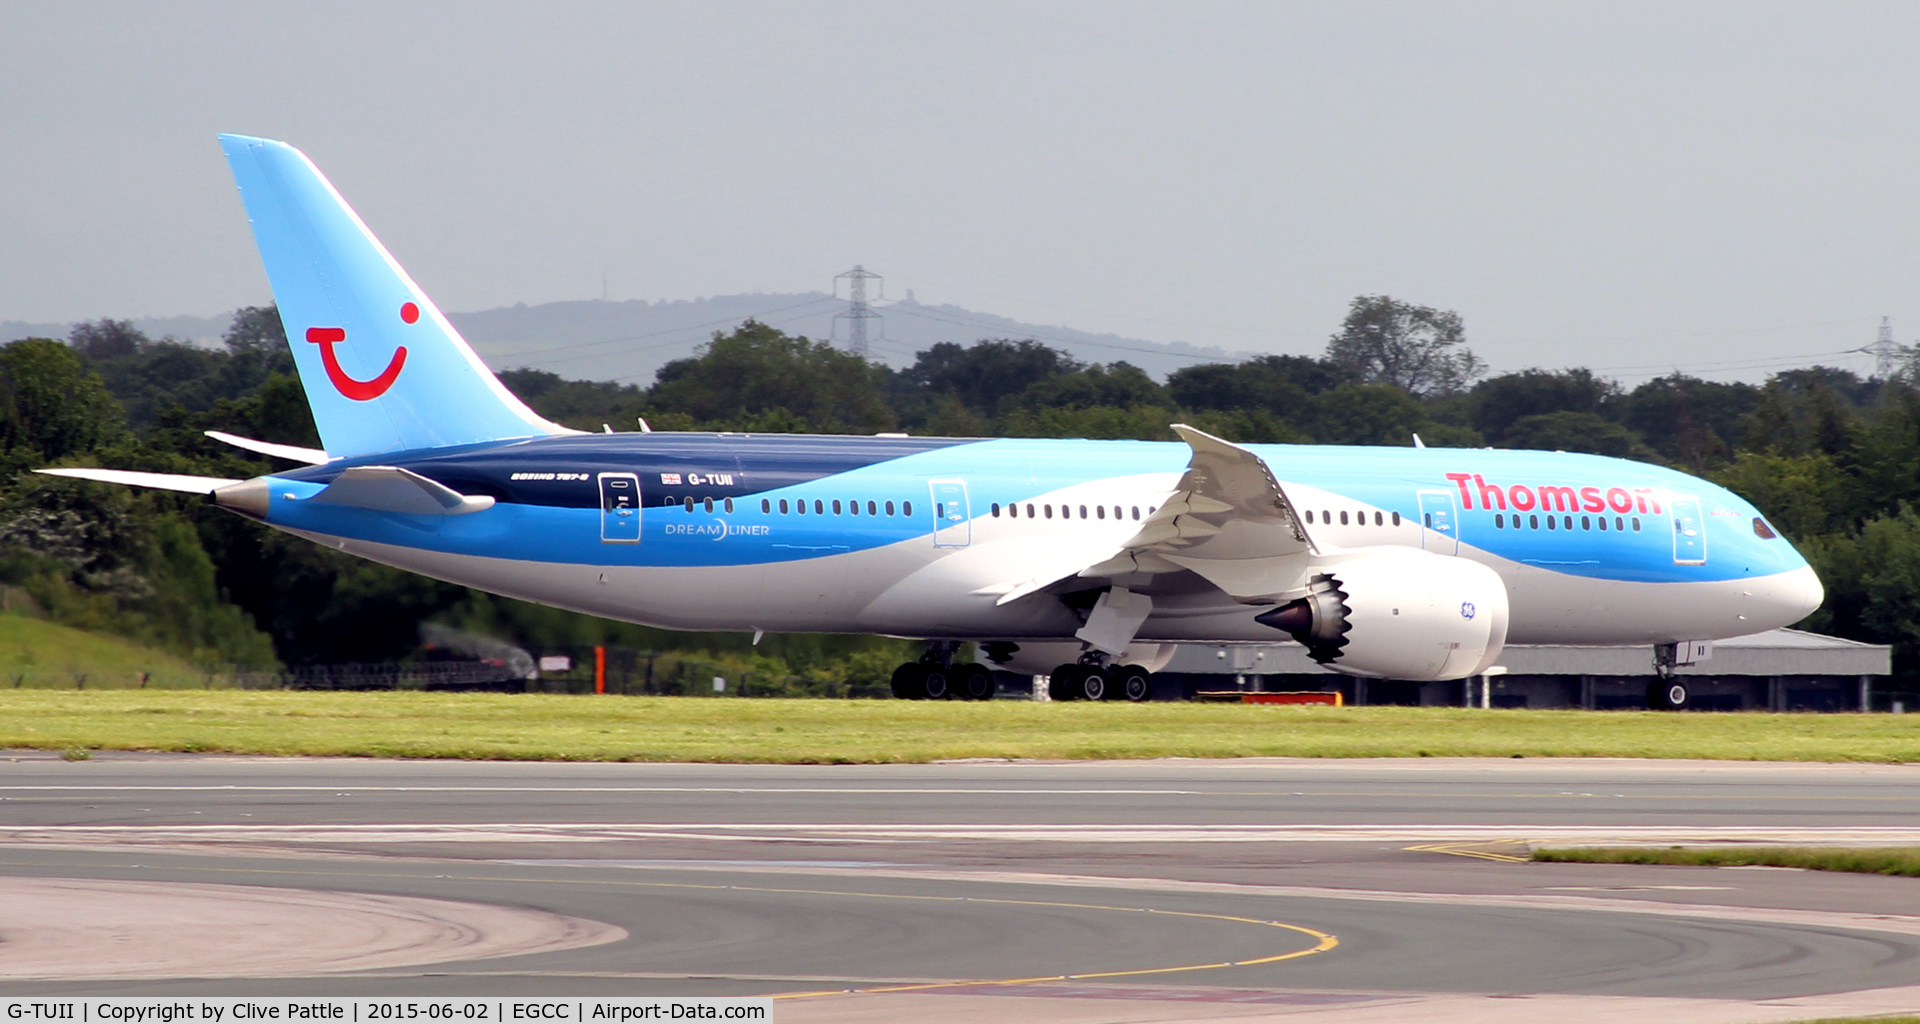 G-TUII, 2015 Boeing 787-8 Dreamliner C/N 37230, Taxy for departure Manchester Airport EGCC